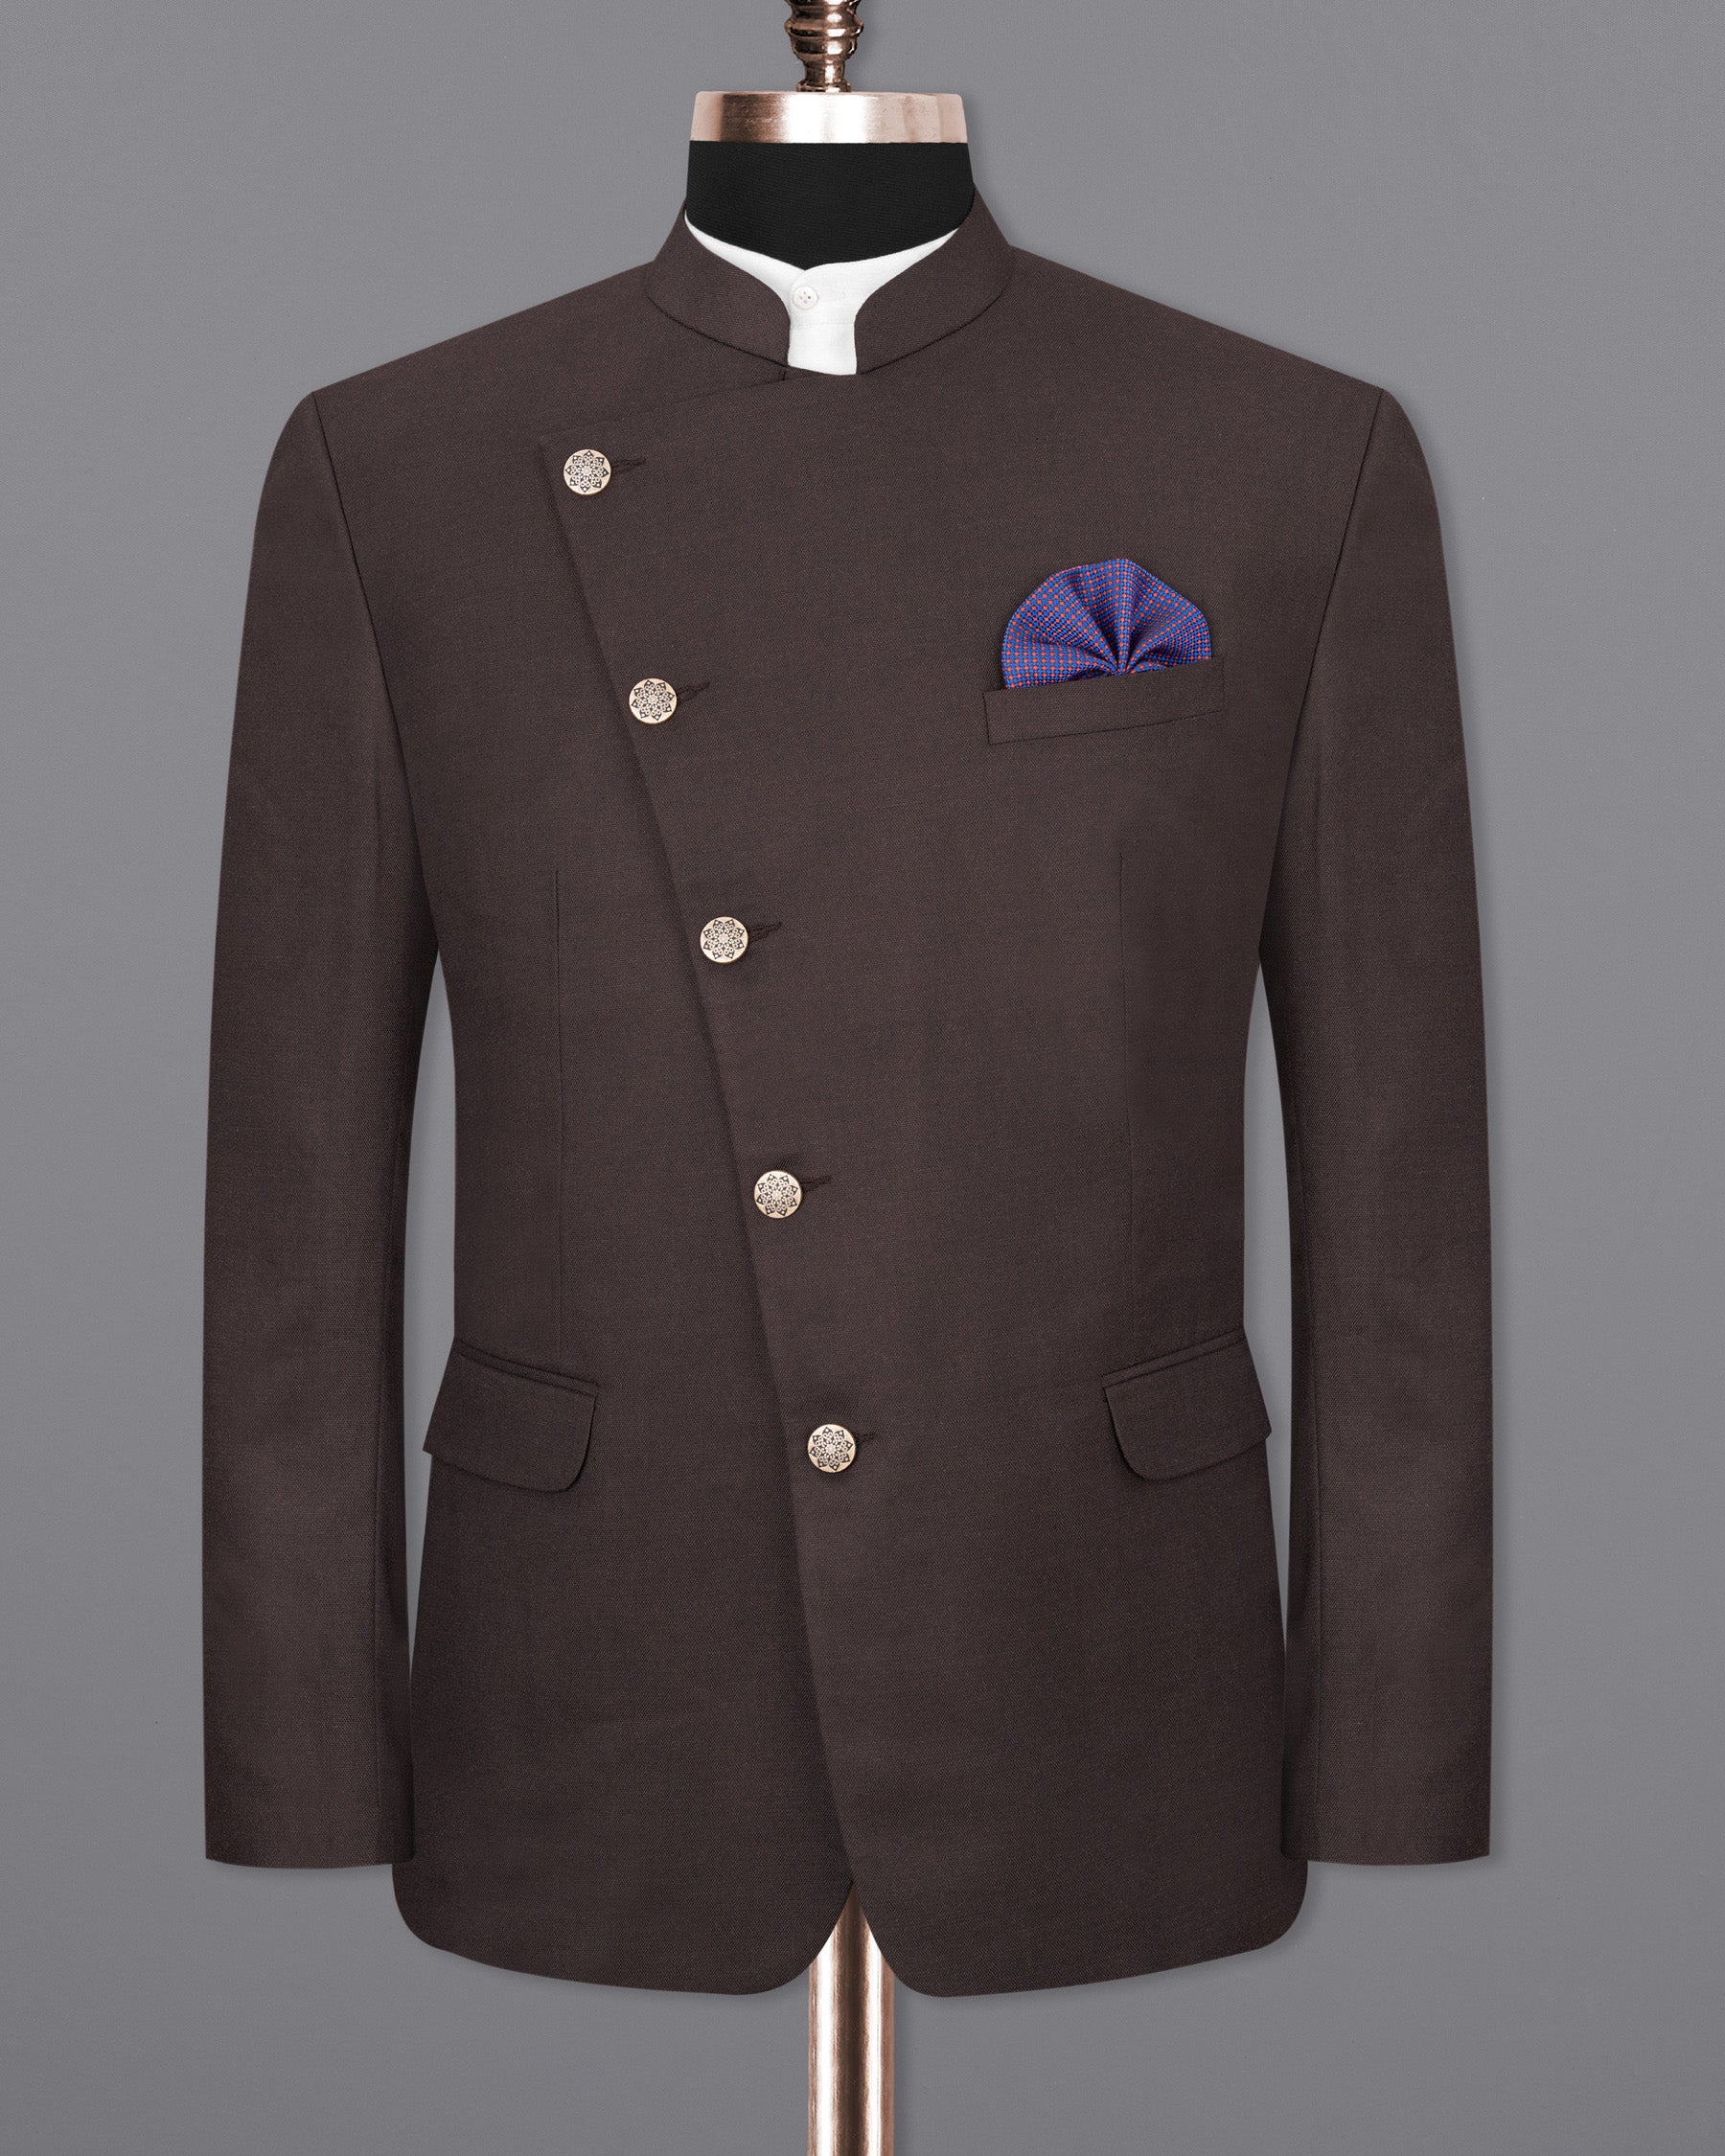 Piano Brown Cross Buttoned Bandhgala Suit ST1829-CBG-36, ST1829-CBG-38, ST1829-CBG-40, ST1829-CBG-42, ST1829-CBG-44, ST1829-CBG-46, ST1829-CBG-48, ST1829-CBG-50, ST1829-CBG-52, ST1829-CBG-54, ST1829-CBG-56, ST1829-CBG-58, ST1829-CBG-60